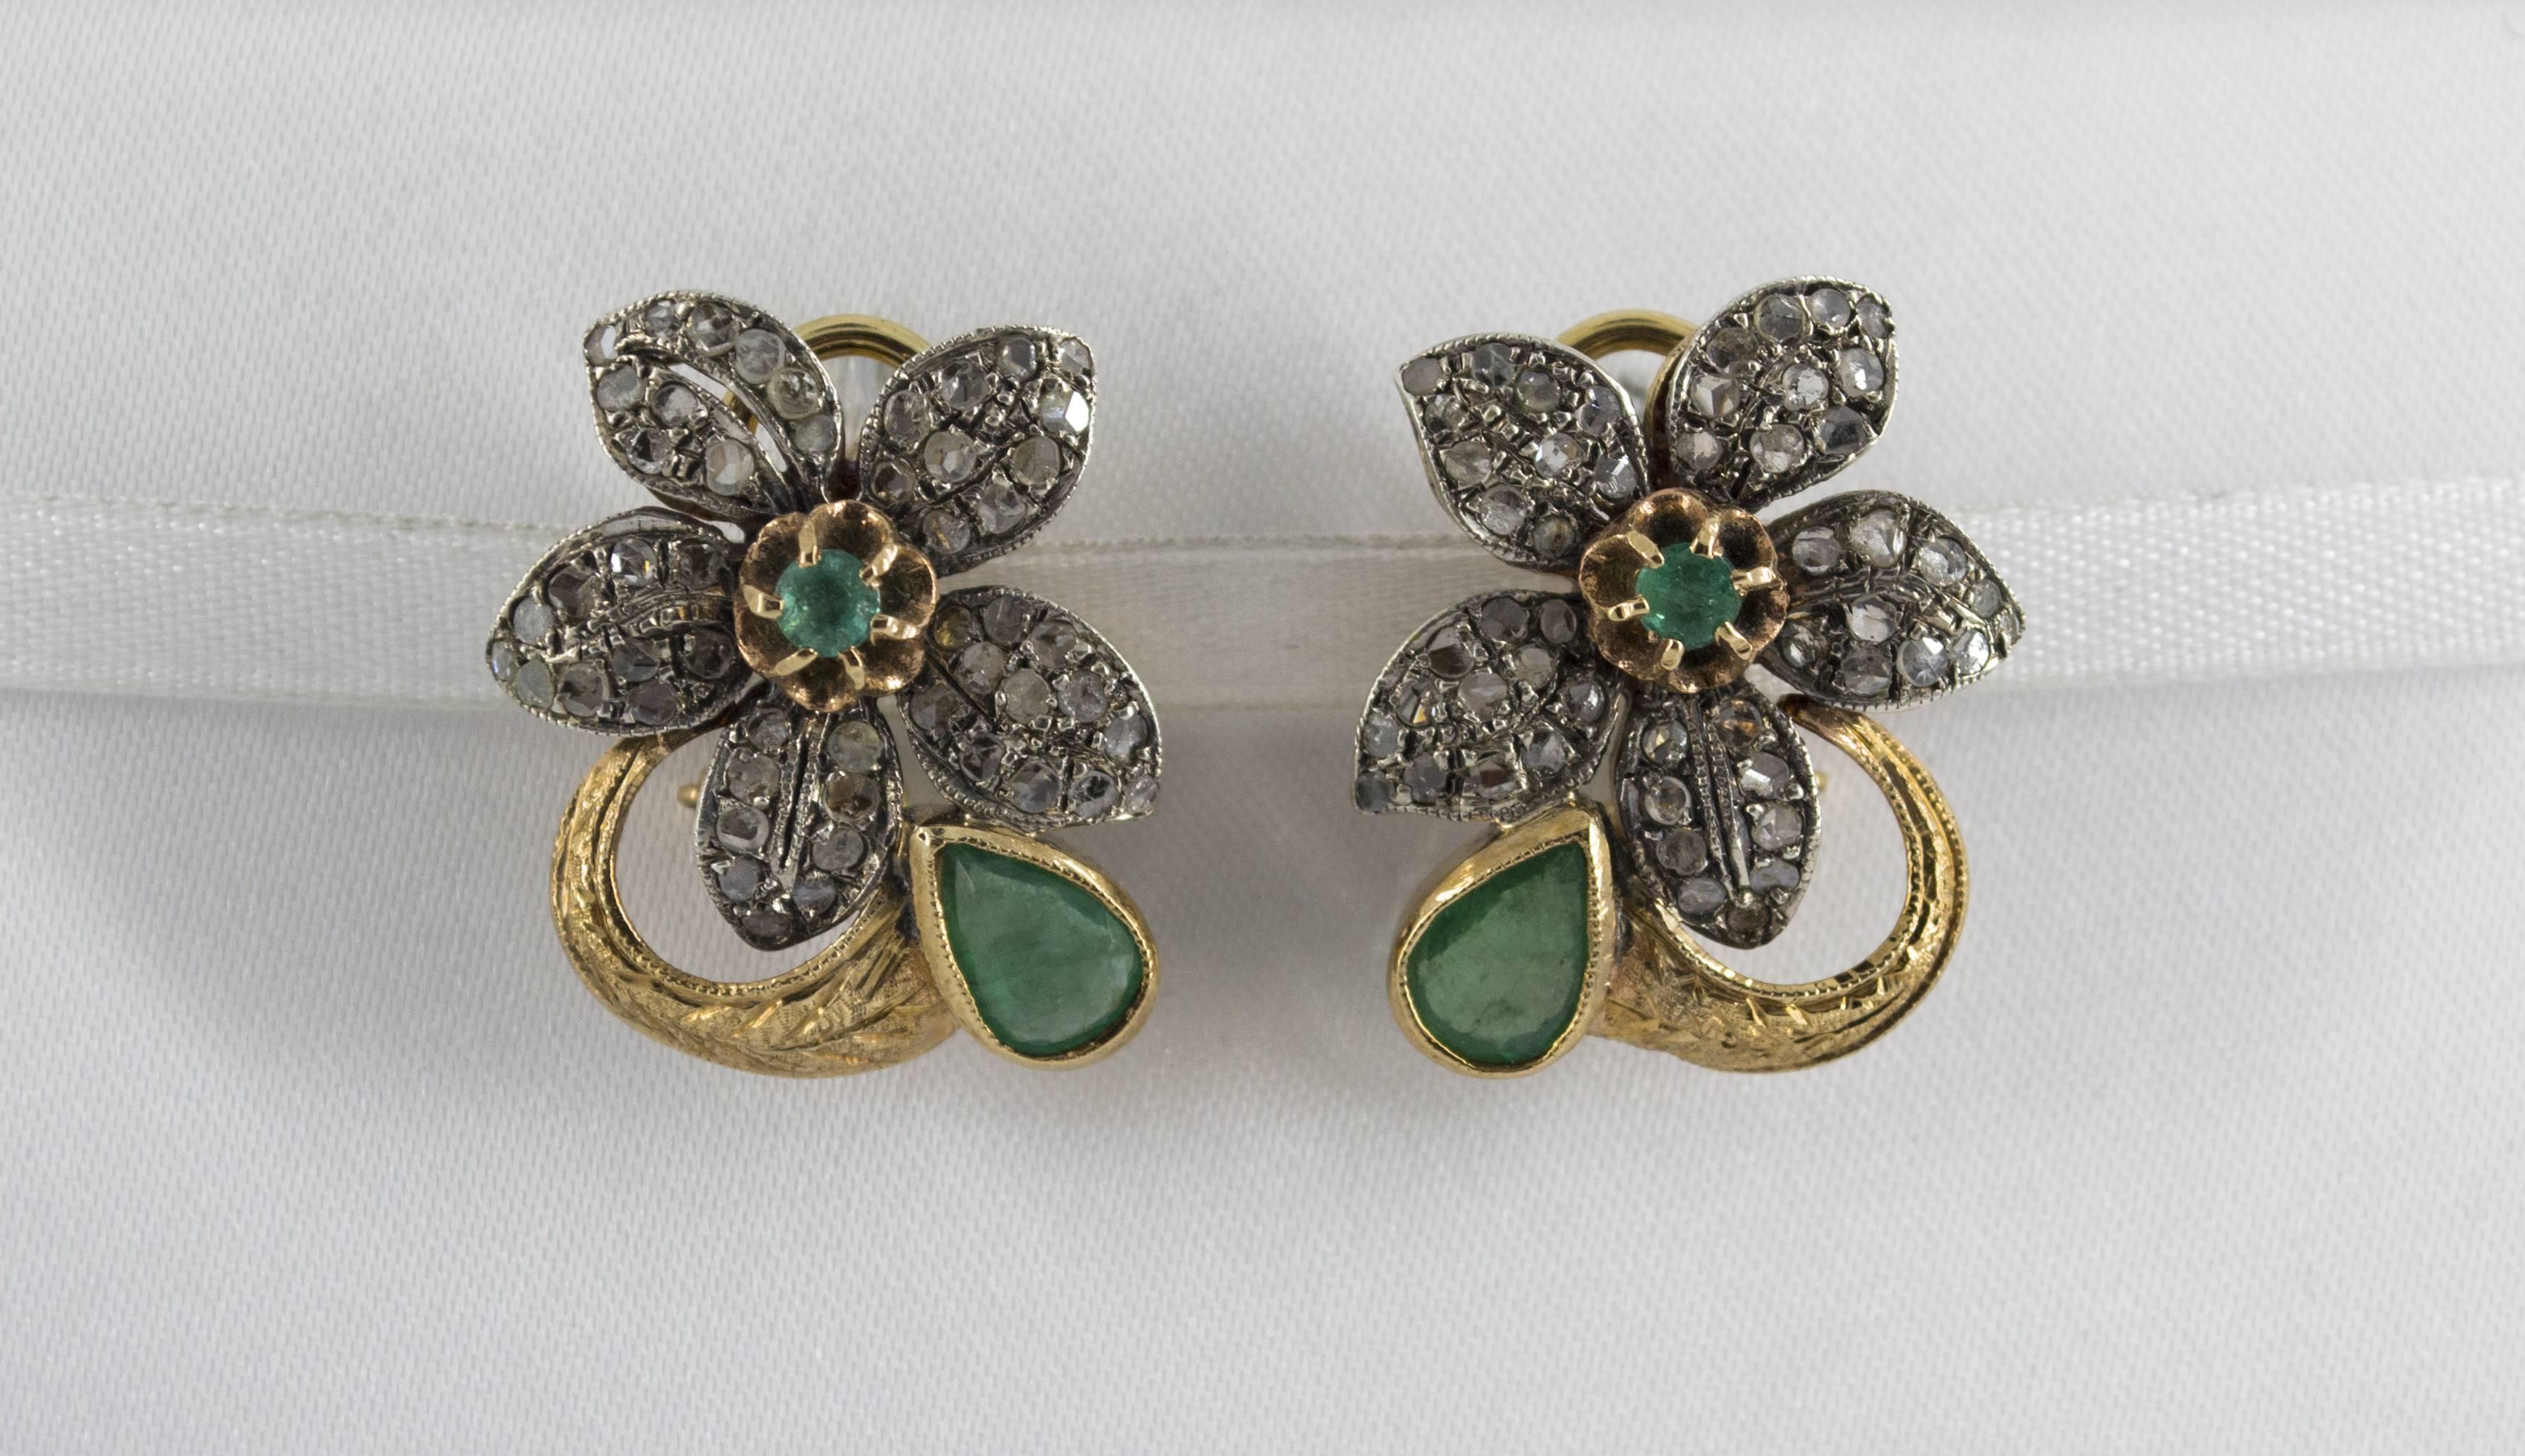 These Earrings are made of 9K Yellow Gold and Sterling Silver.
These Earrings have 0.60 Carats of White Diamonds.
These Earrings have 2.00 Carats of Emeralds.
All our Earrings have pins for pierced ears but we can change the closure and make any of